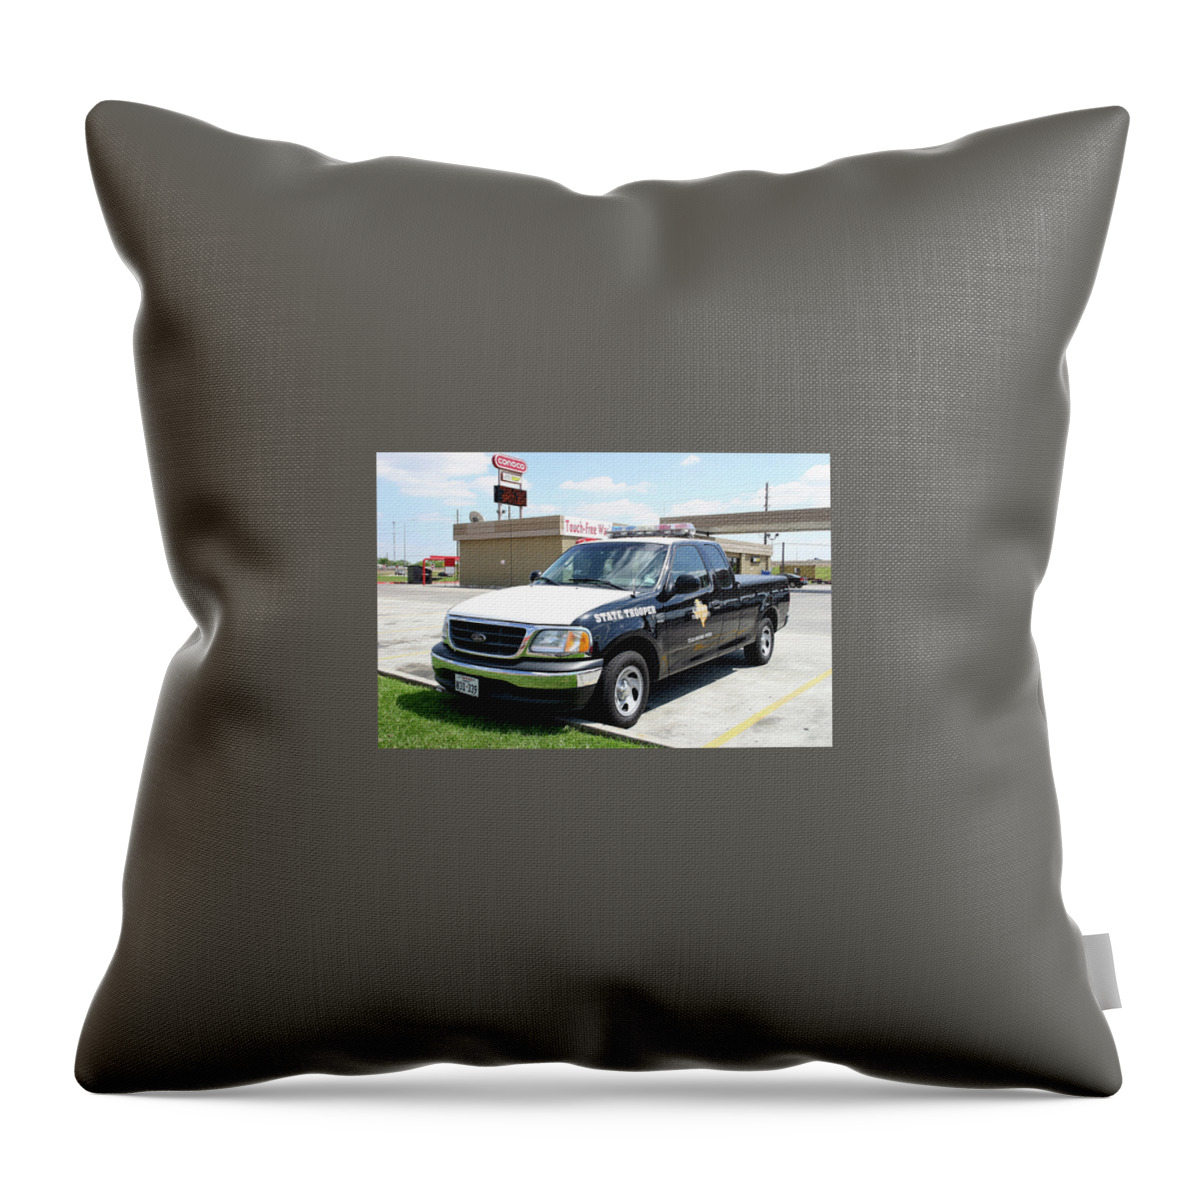 Police Throw Pillow featuring the photograph Police by Jackie Russo